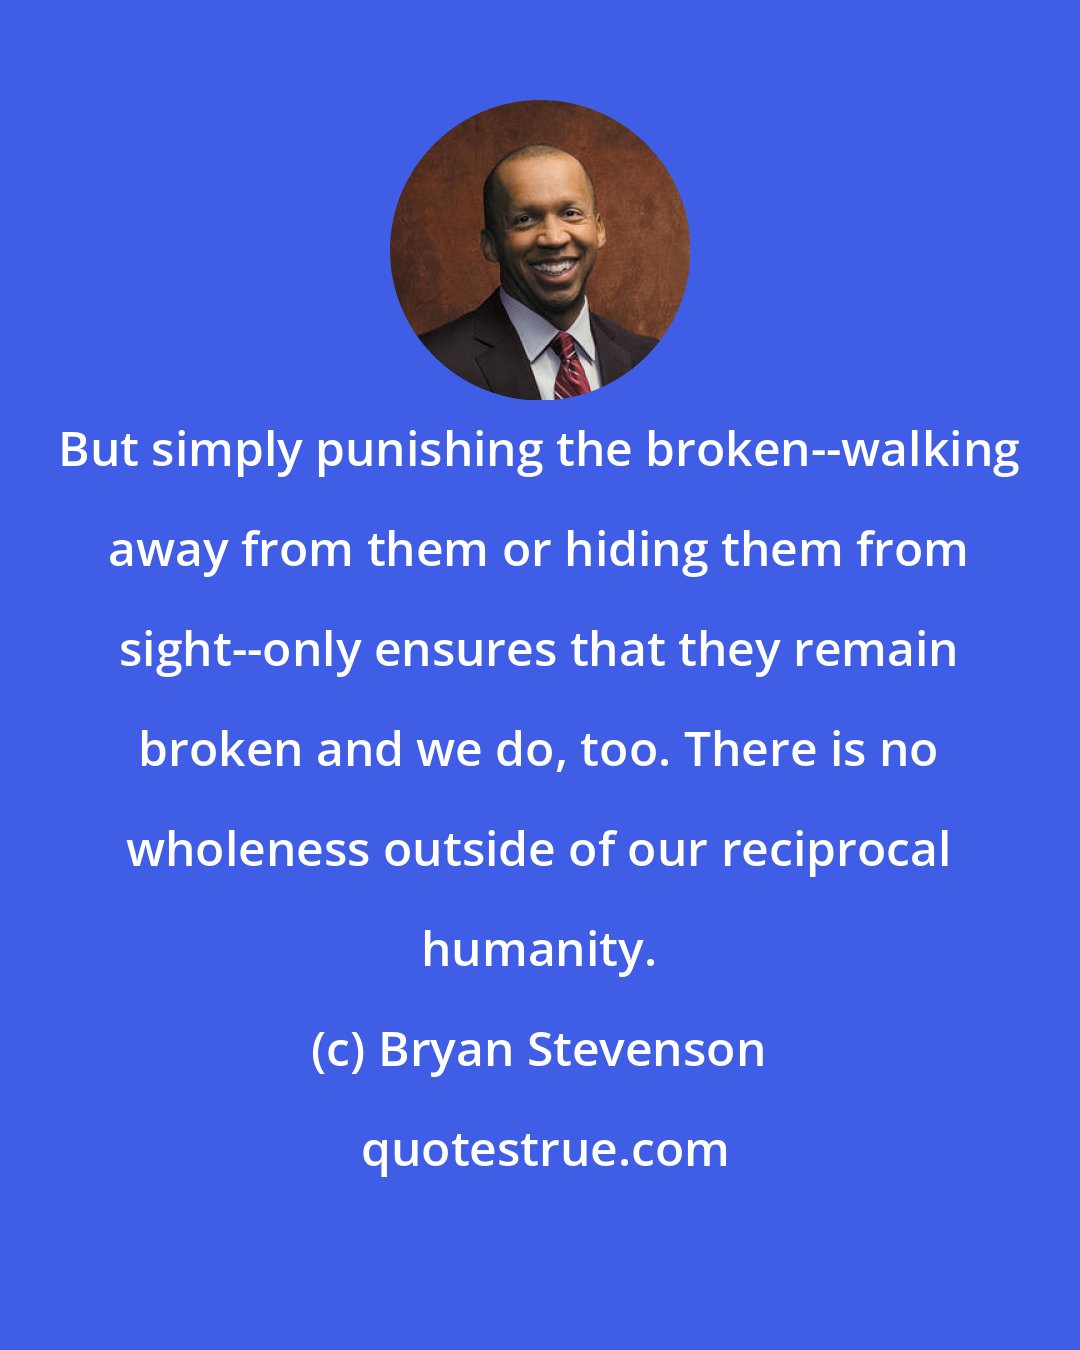 Bryan Stevenson: But simply punishing the broken--walking away from them or hiding them from sight--only ensures that they remain broken and we do, too. There is no wholeness outside of our reciprocal humanity.